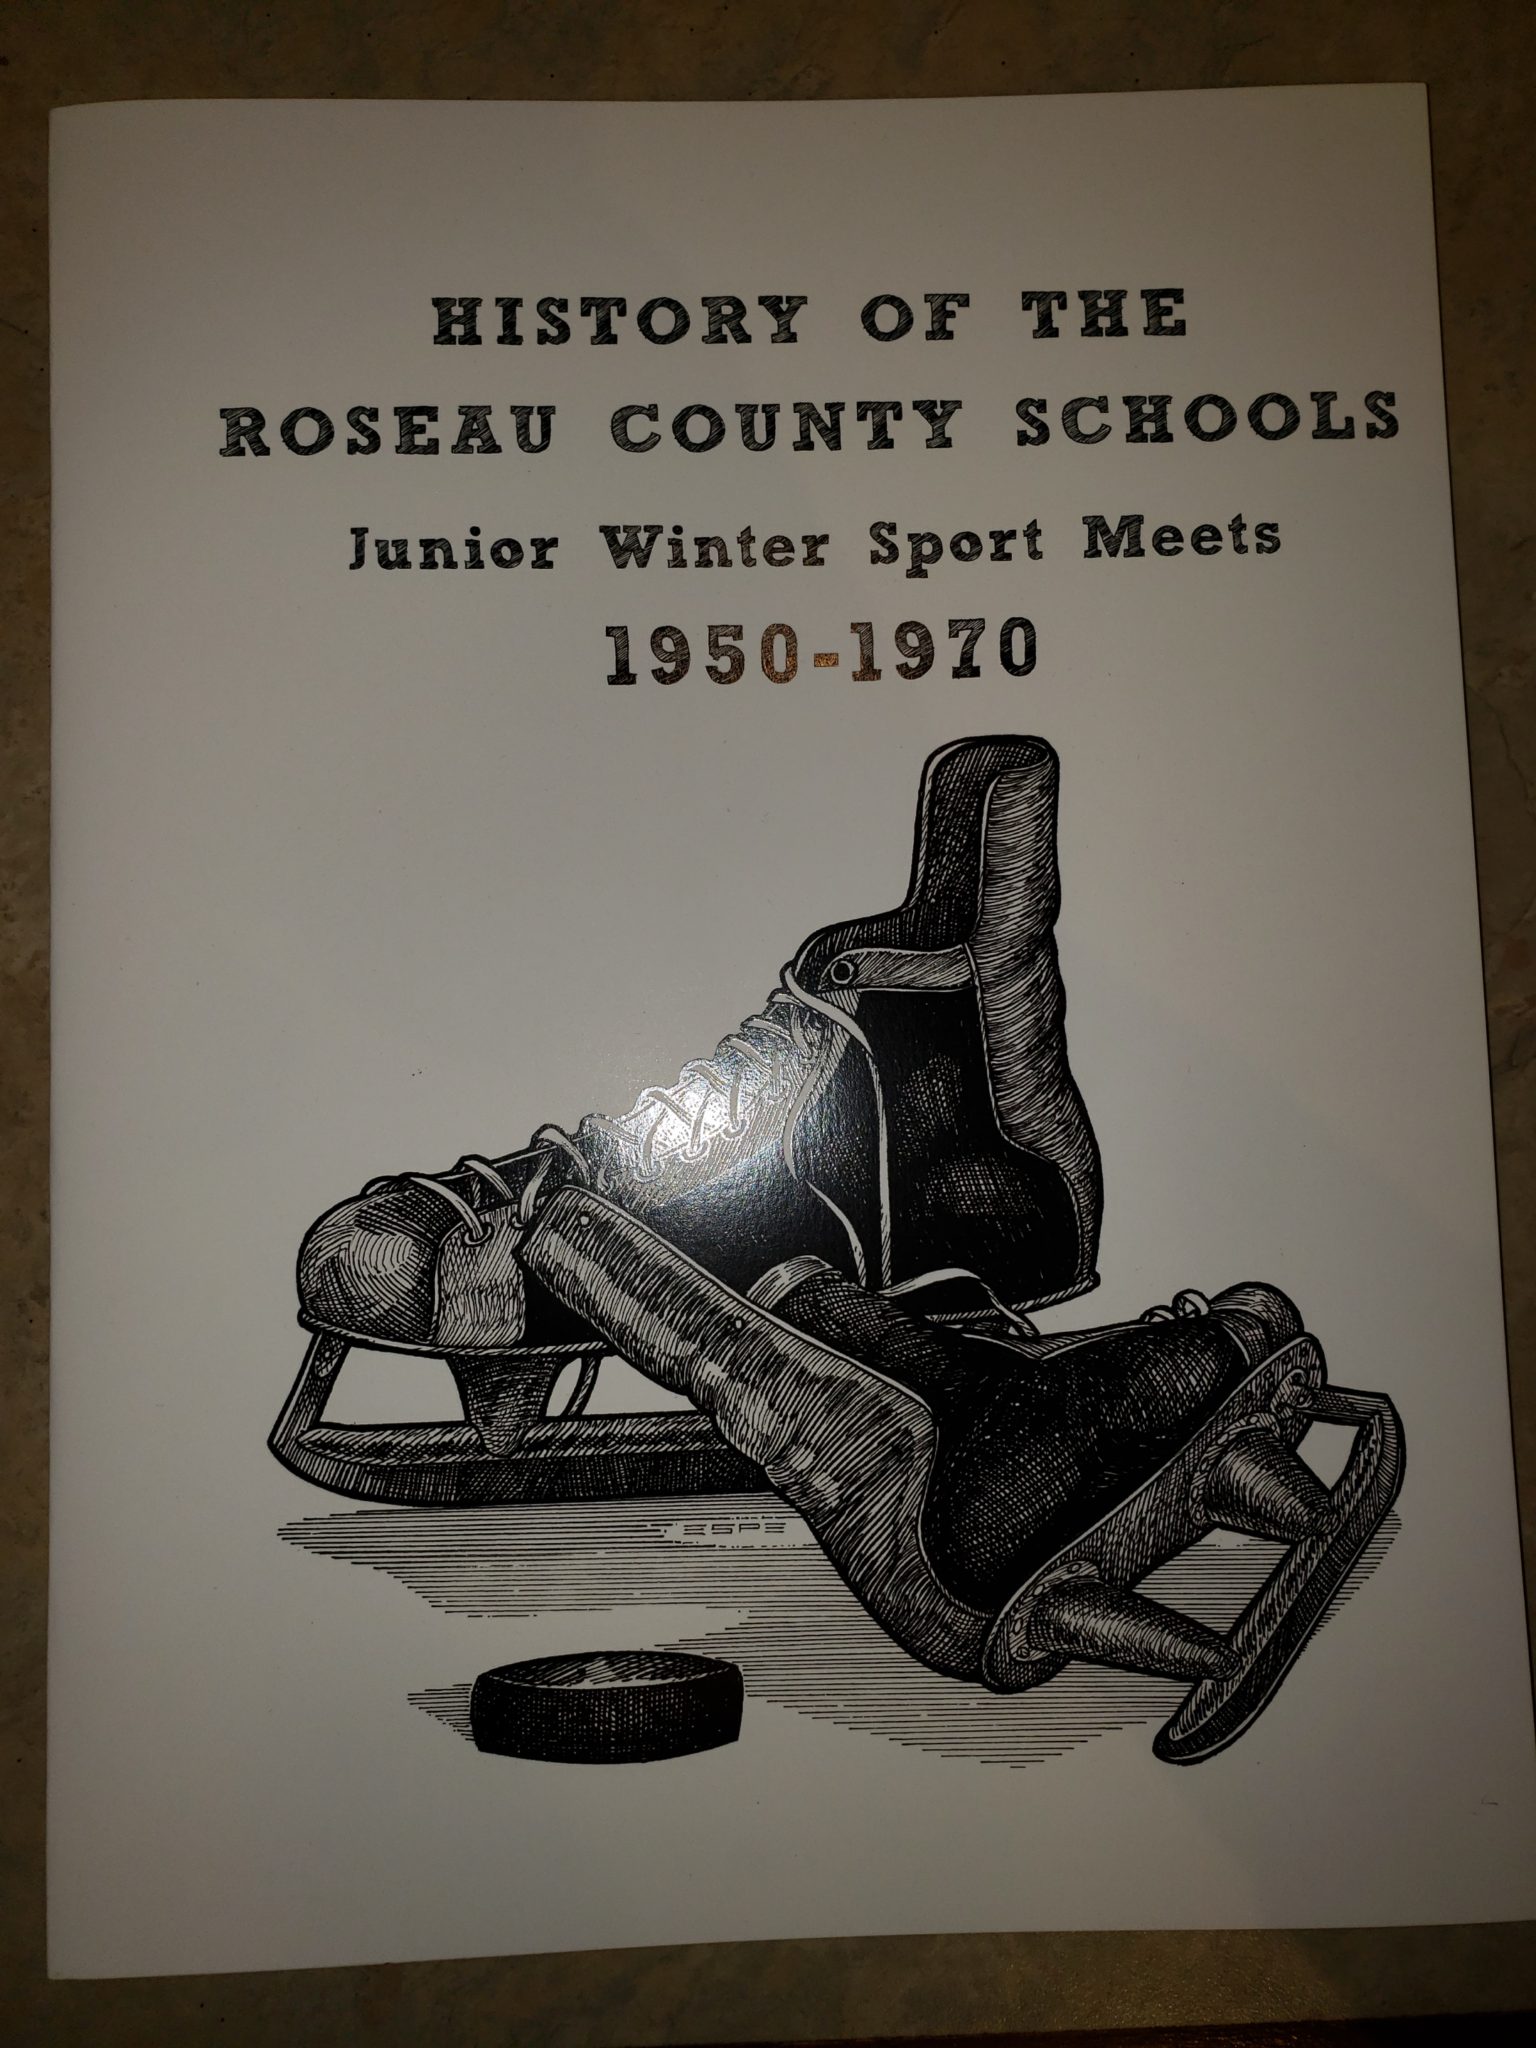 History of the Roseau County Schools - Junior Winter Sports Meets